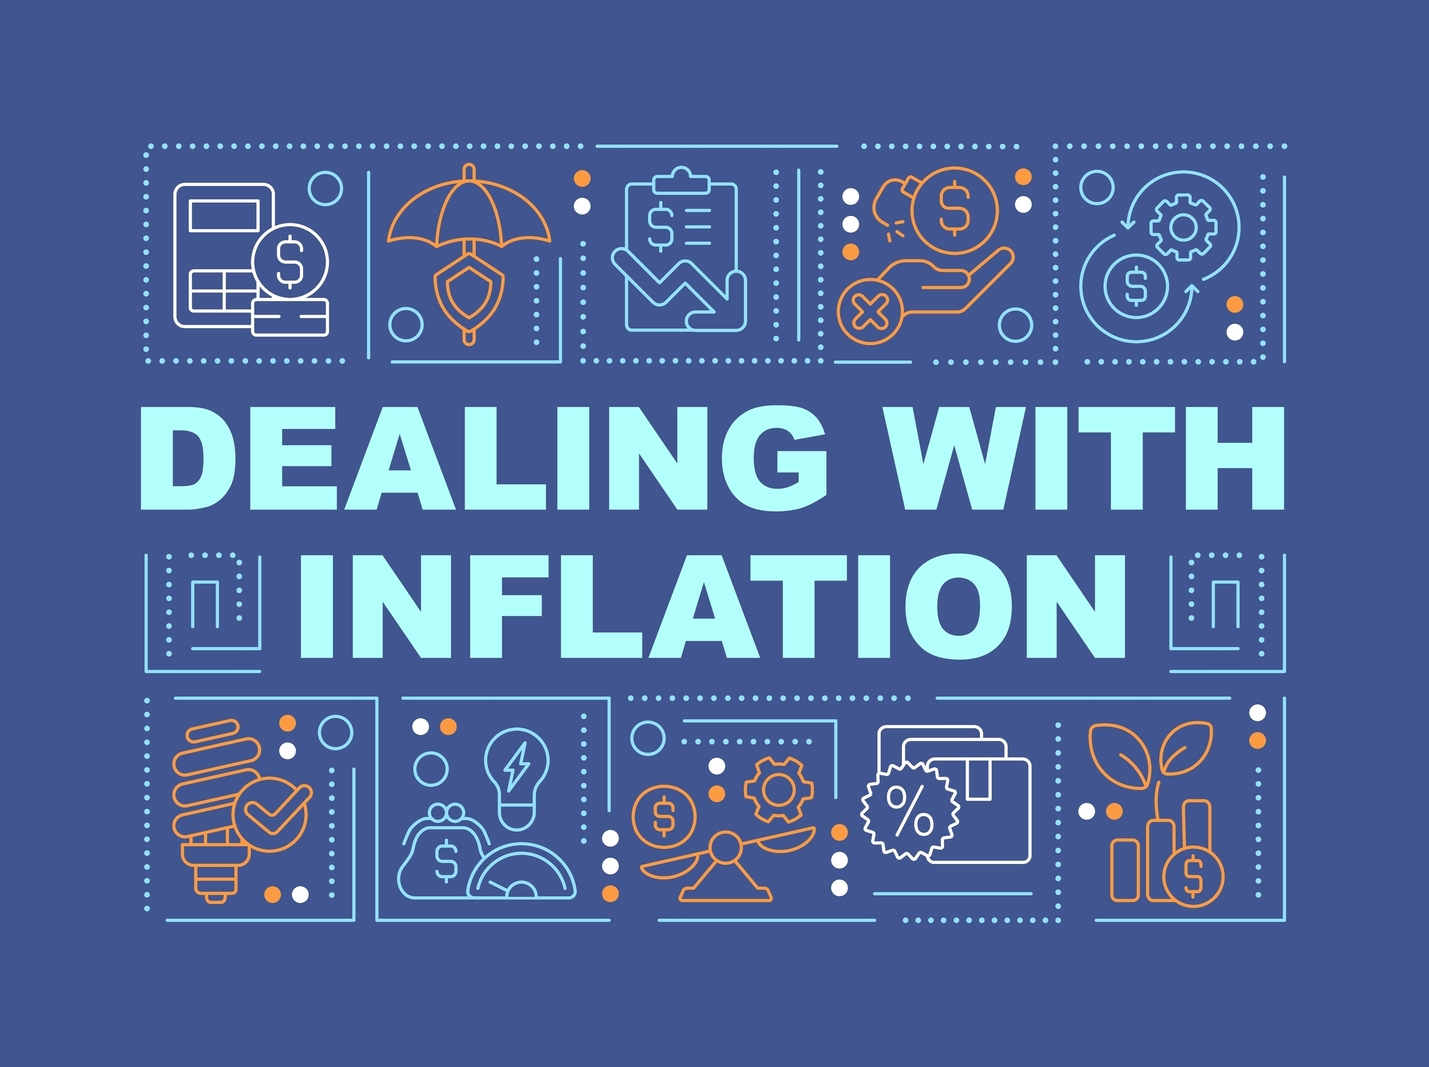 What’s the best way for a business to deal with inflation?